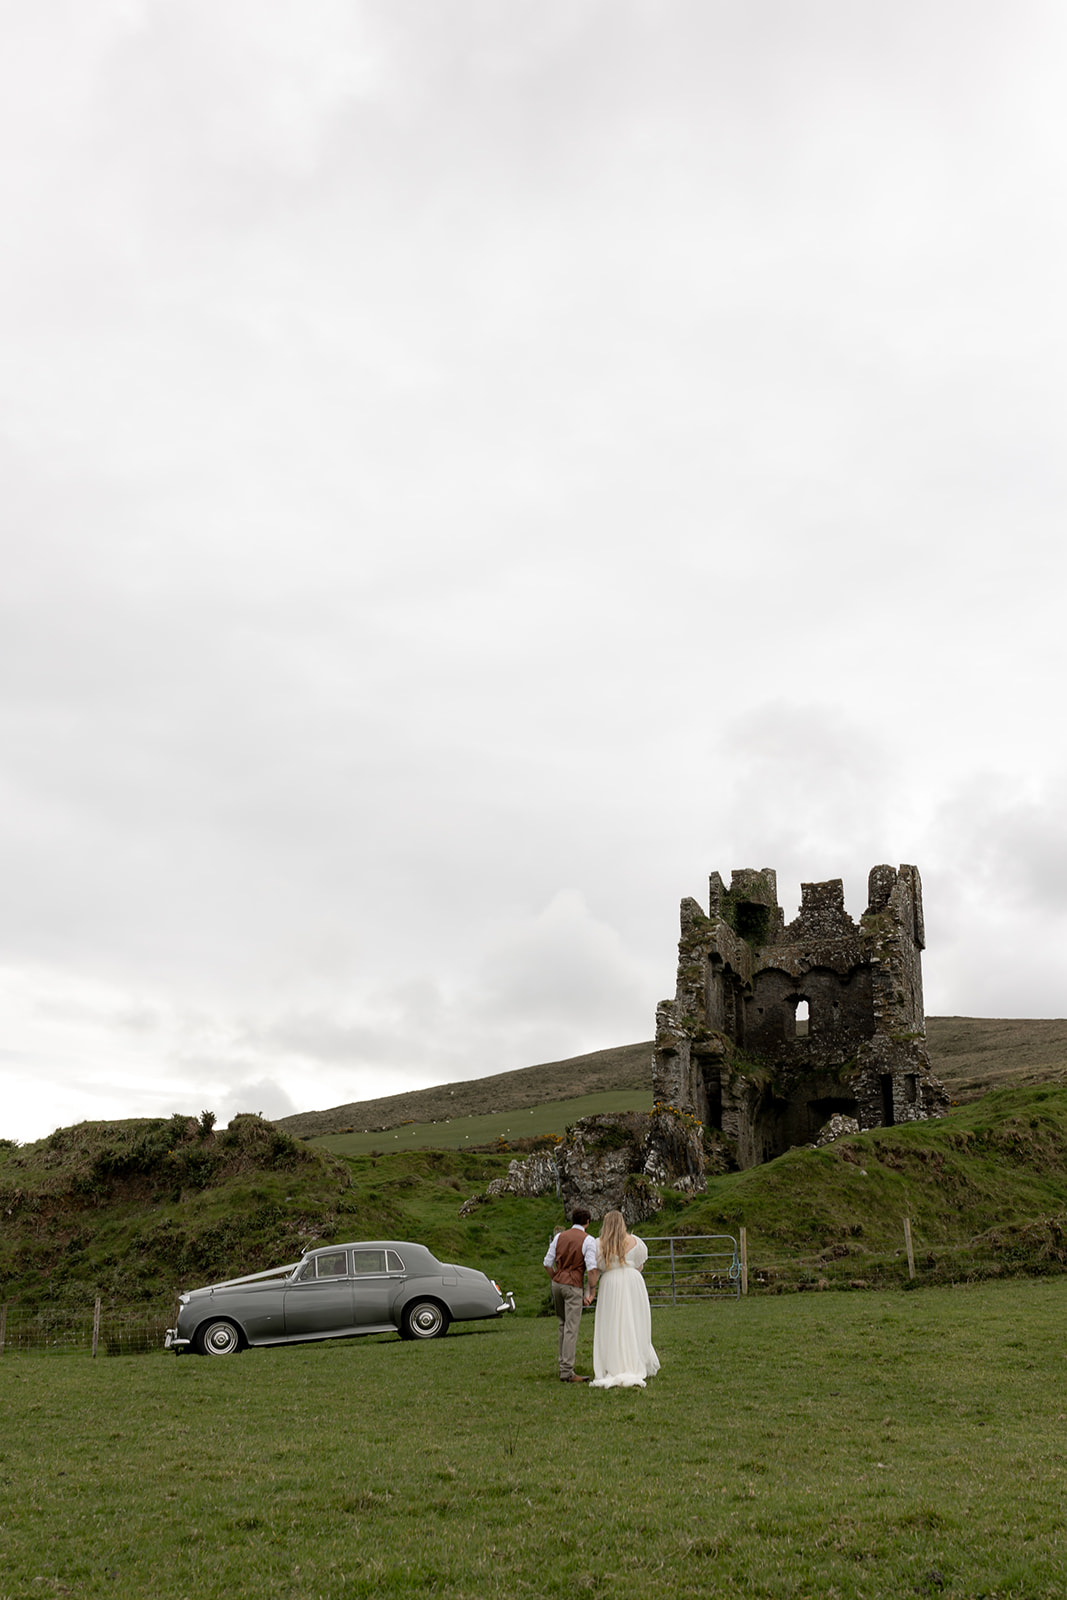 Bride and groom walking towards castle ruins. Rolls Royce parked next to them.